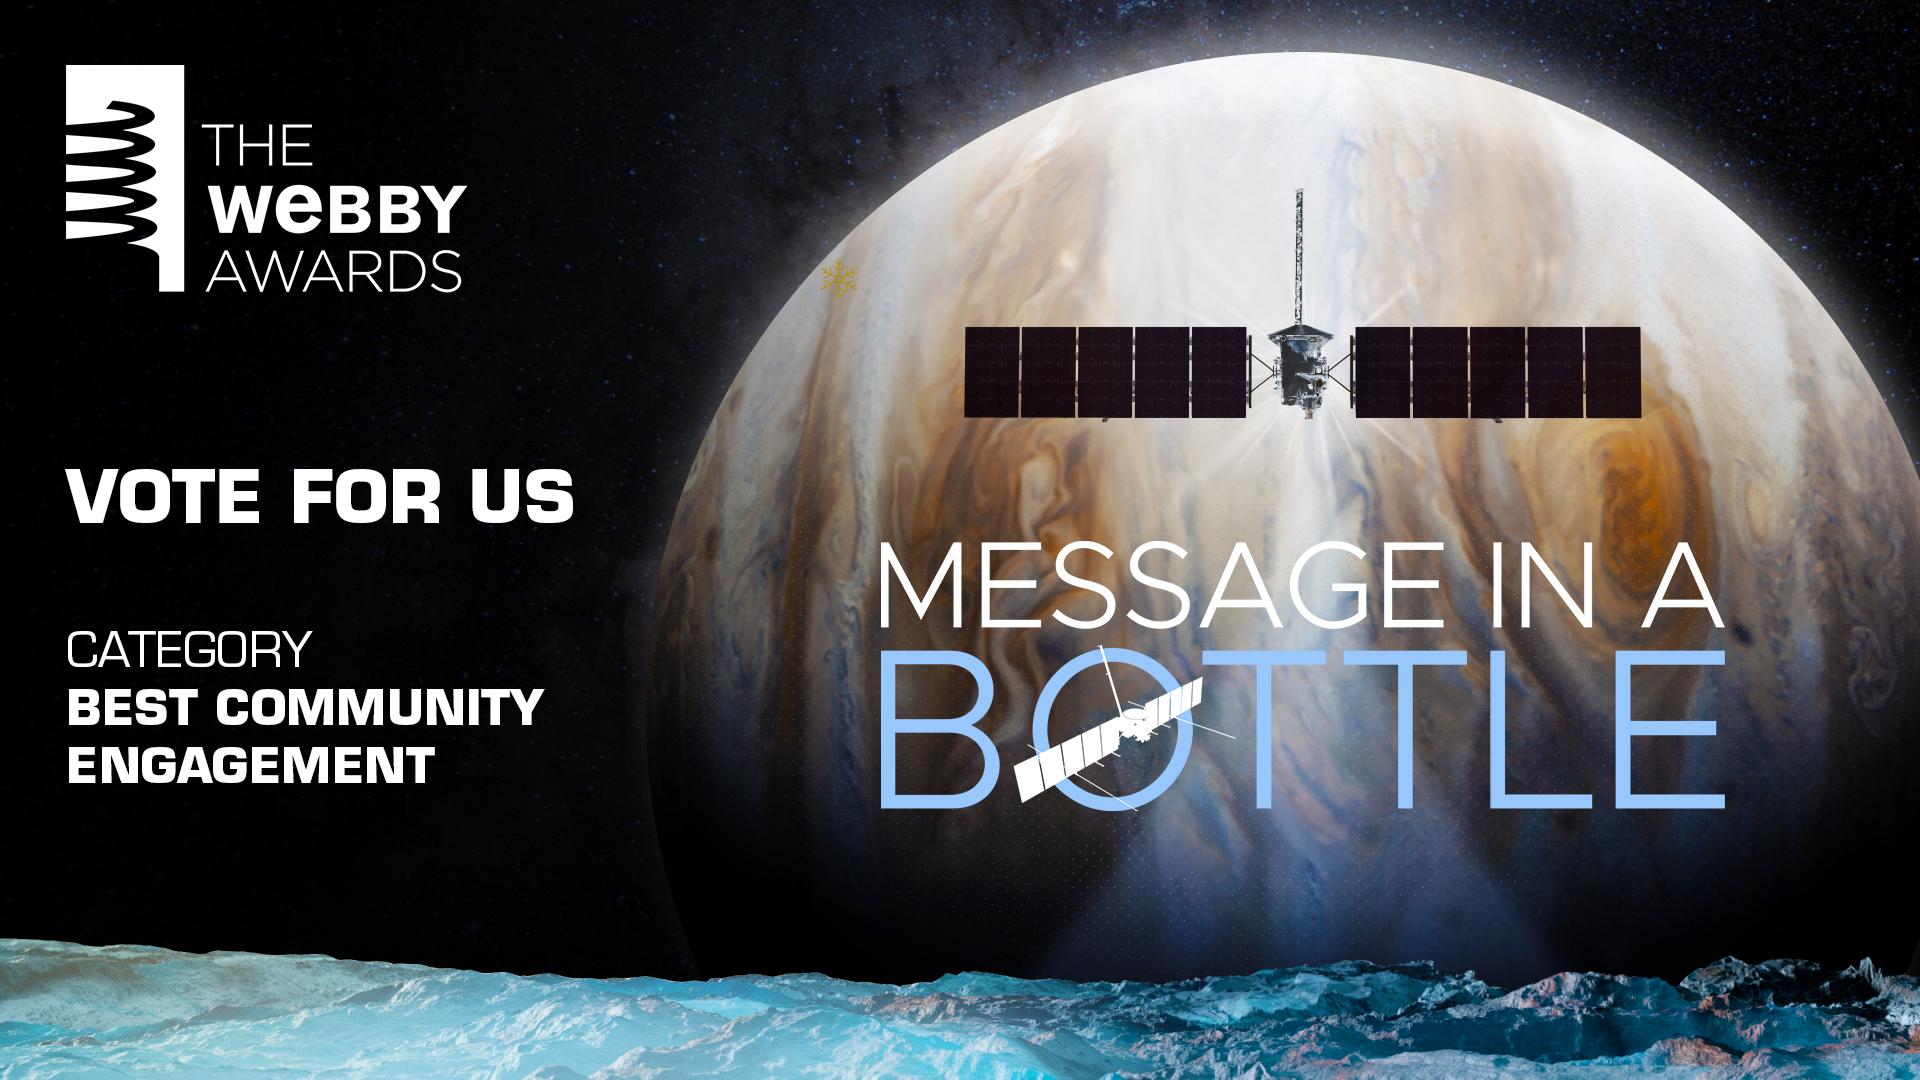 An artist's concept of Jupiter with the Europa Clipper spacecraft in front of the planet. The text on the illustration announces the Message in a Bottle campaign has been nominated for a Webby.